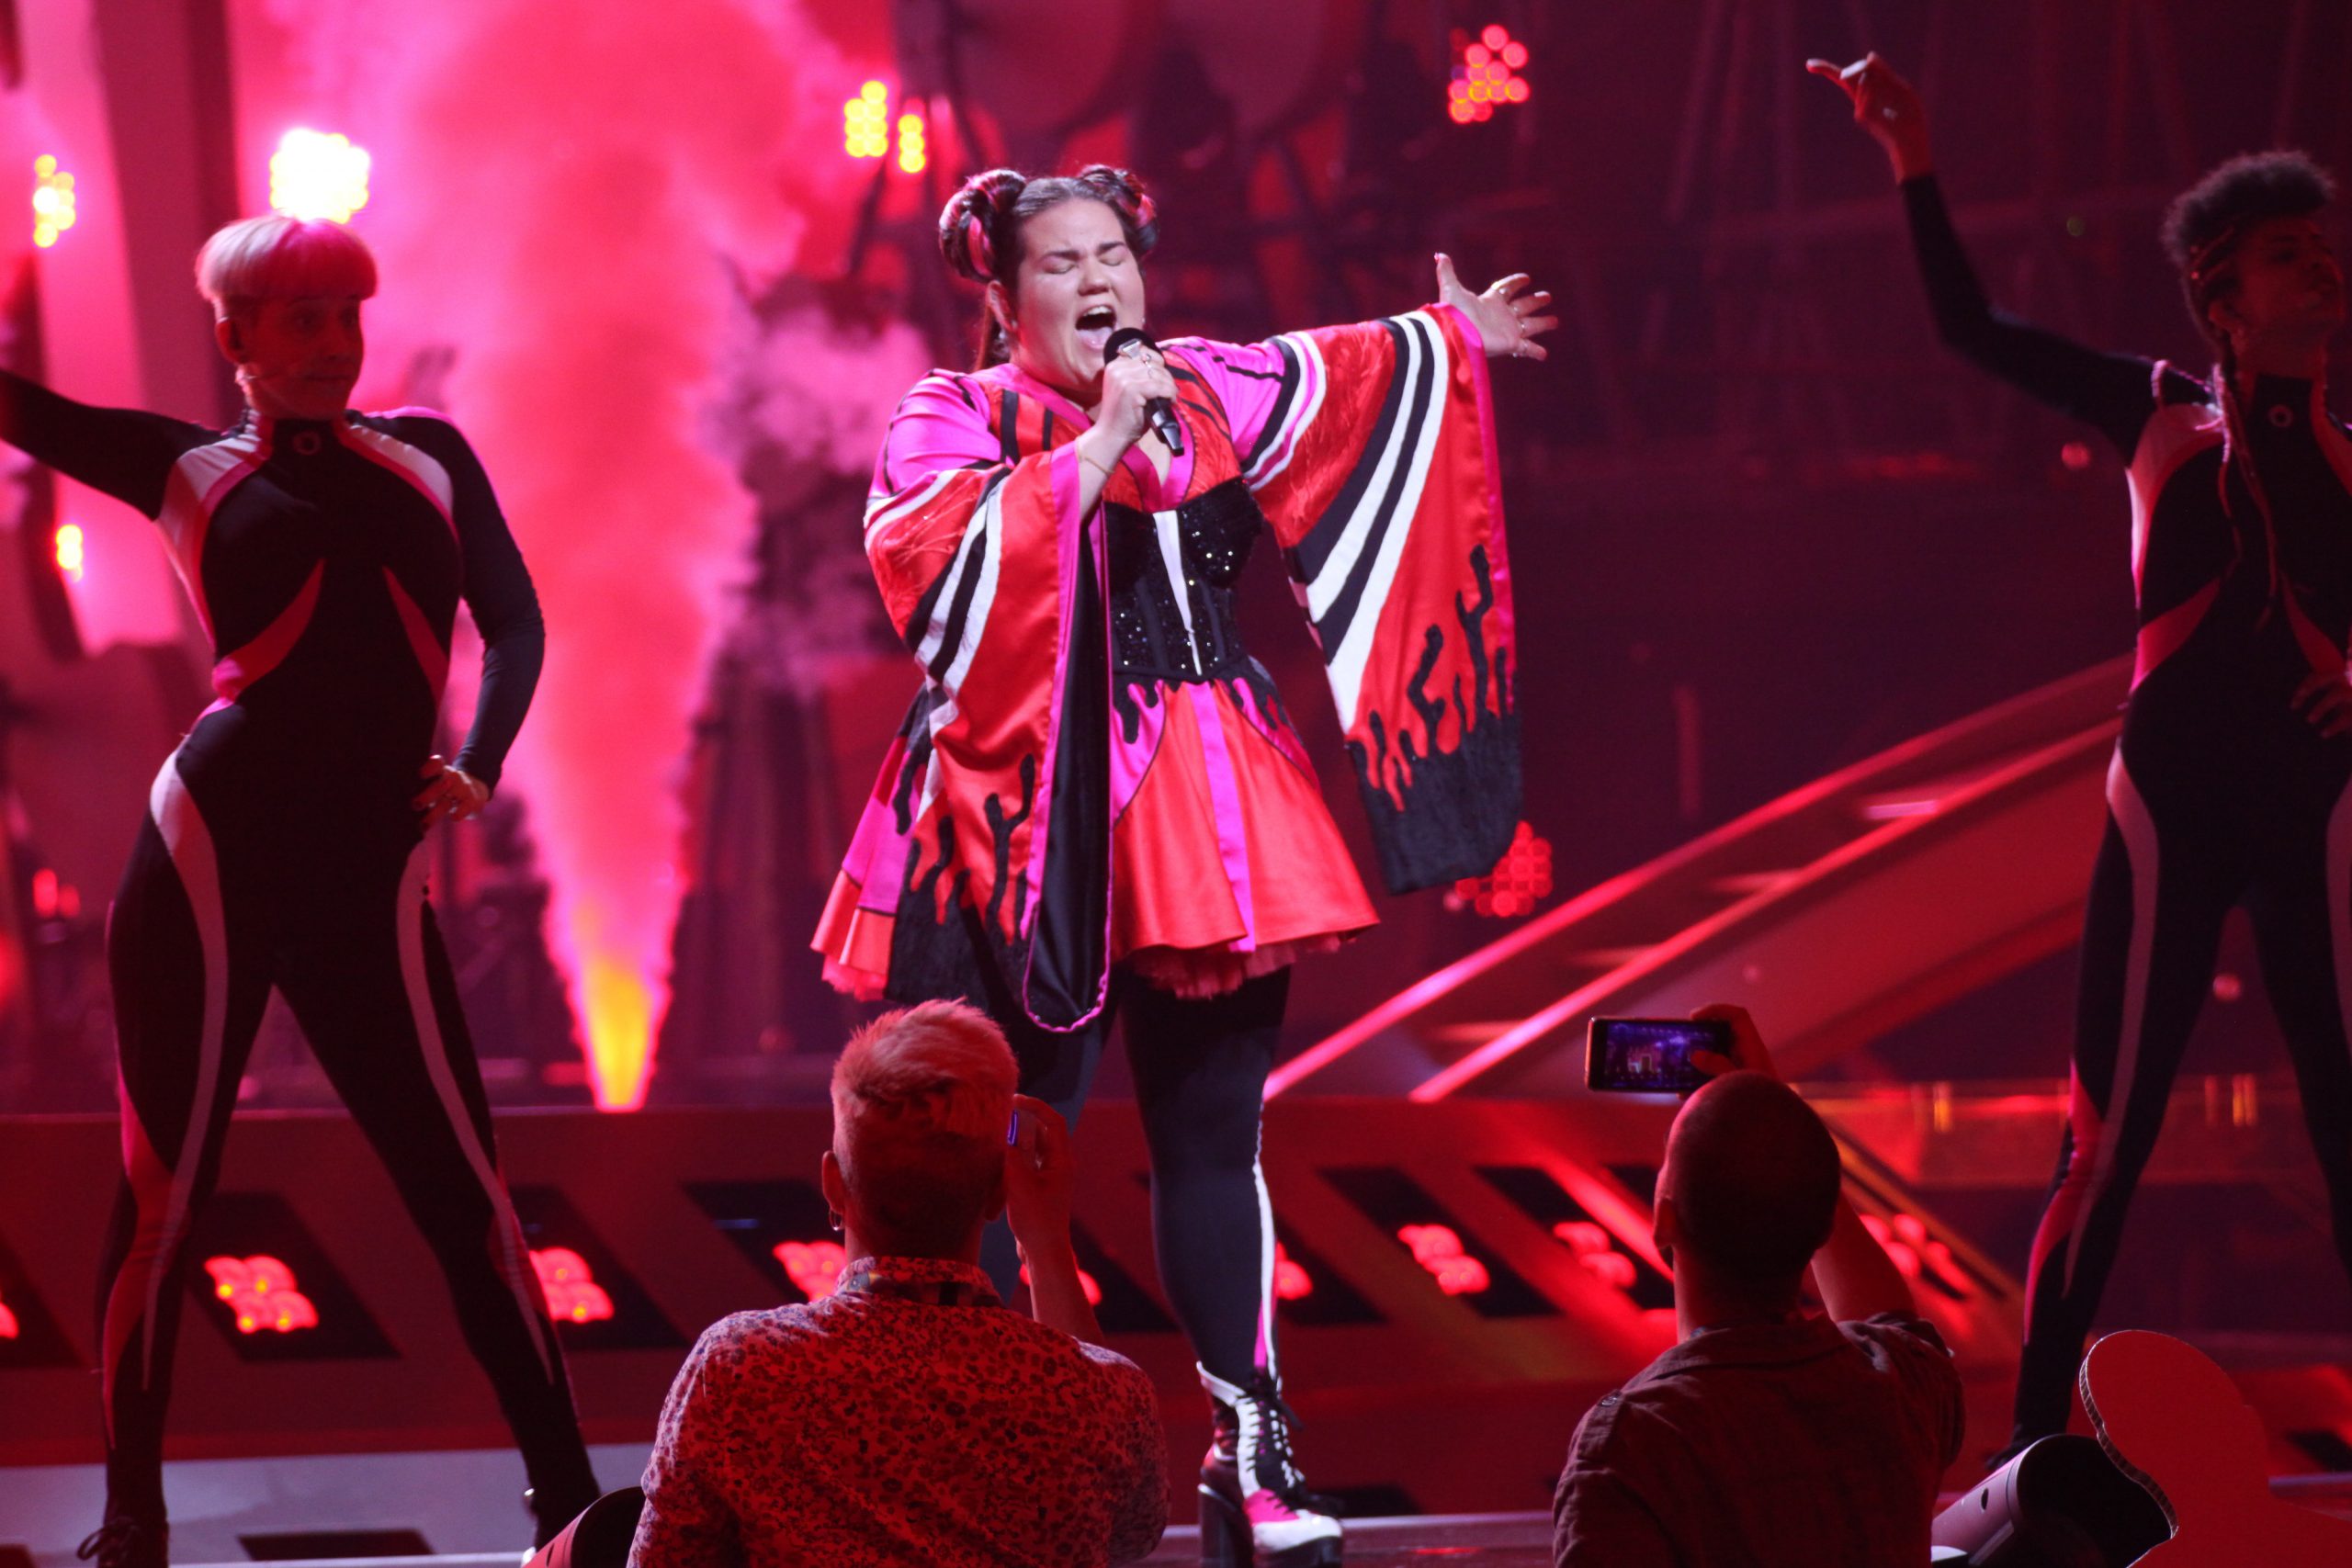 Israel in the 2018 Eurovision Song Contest